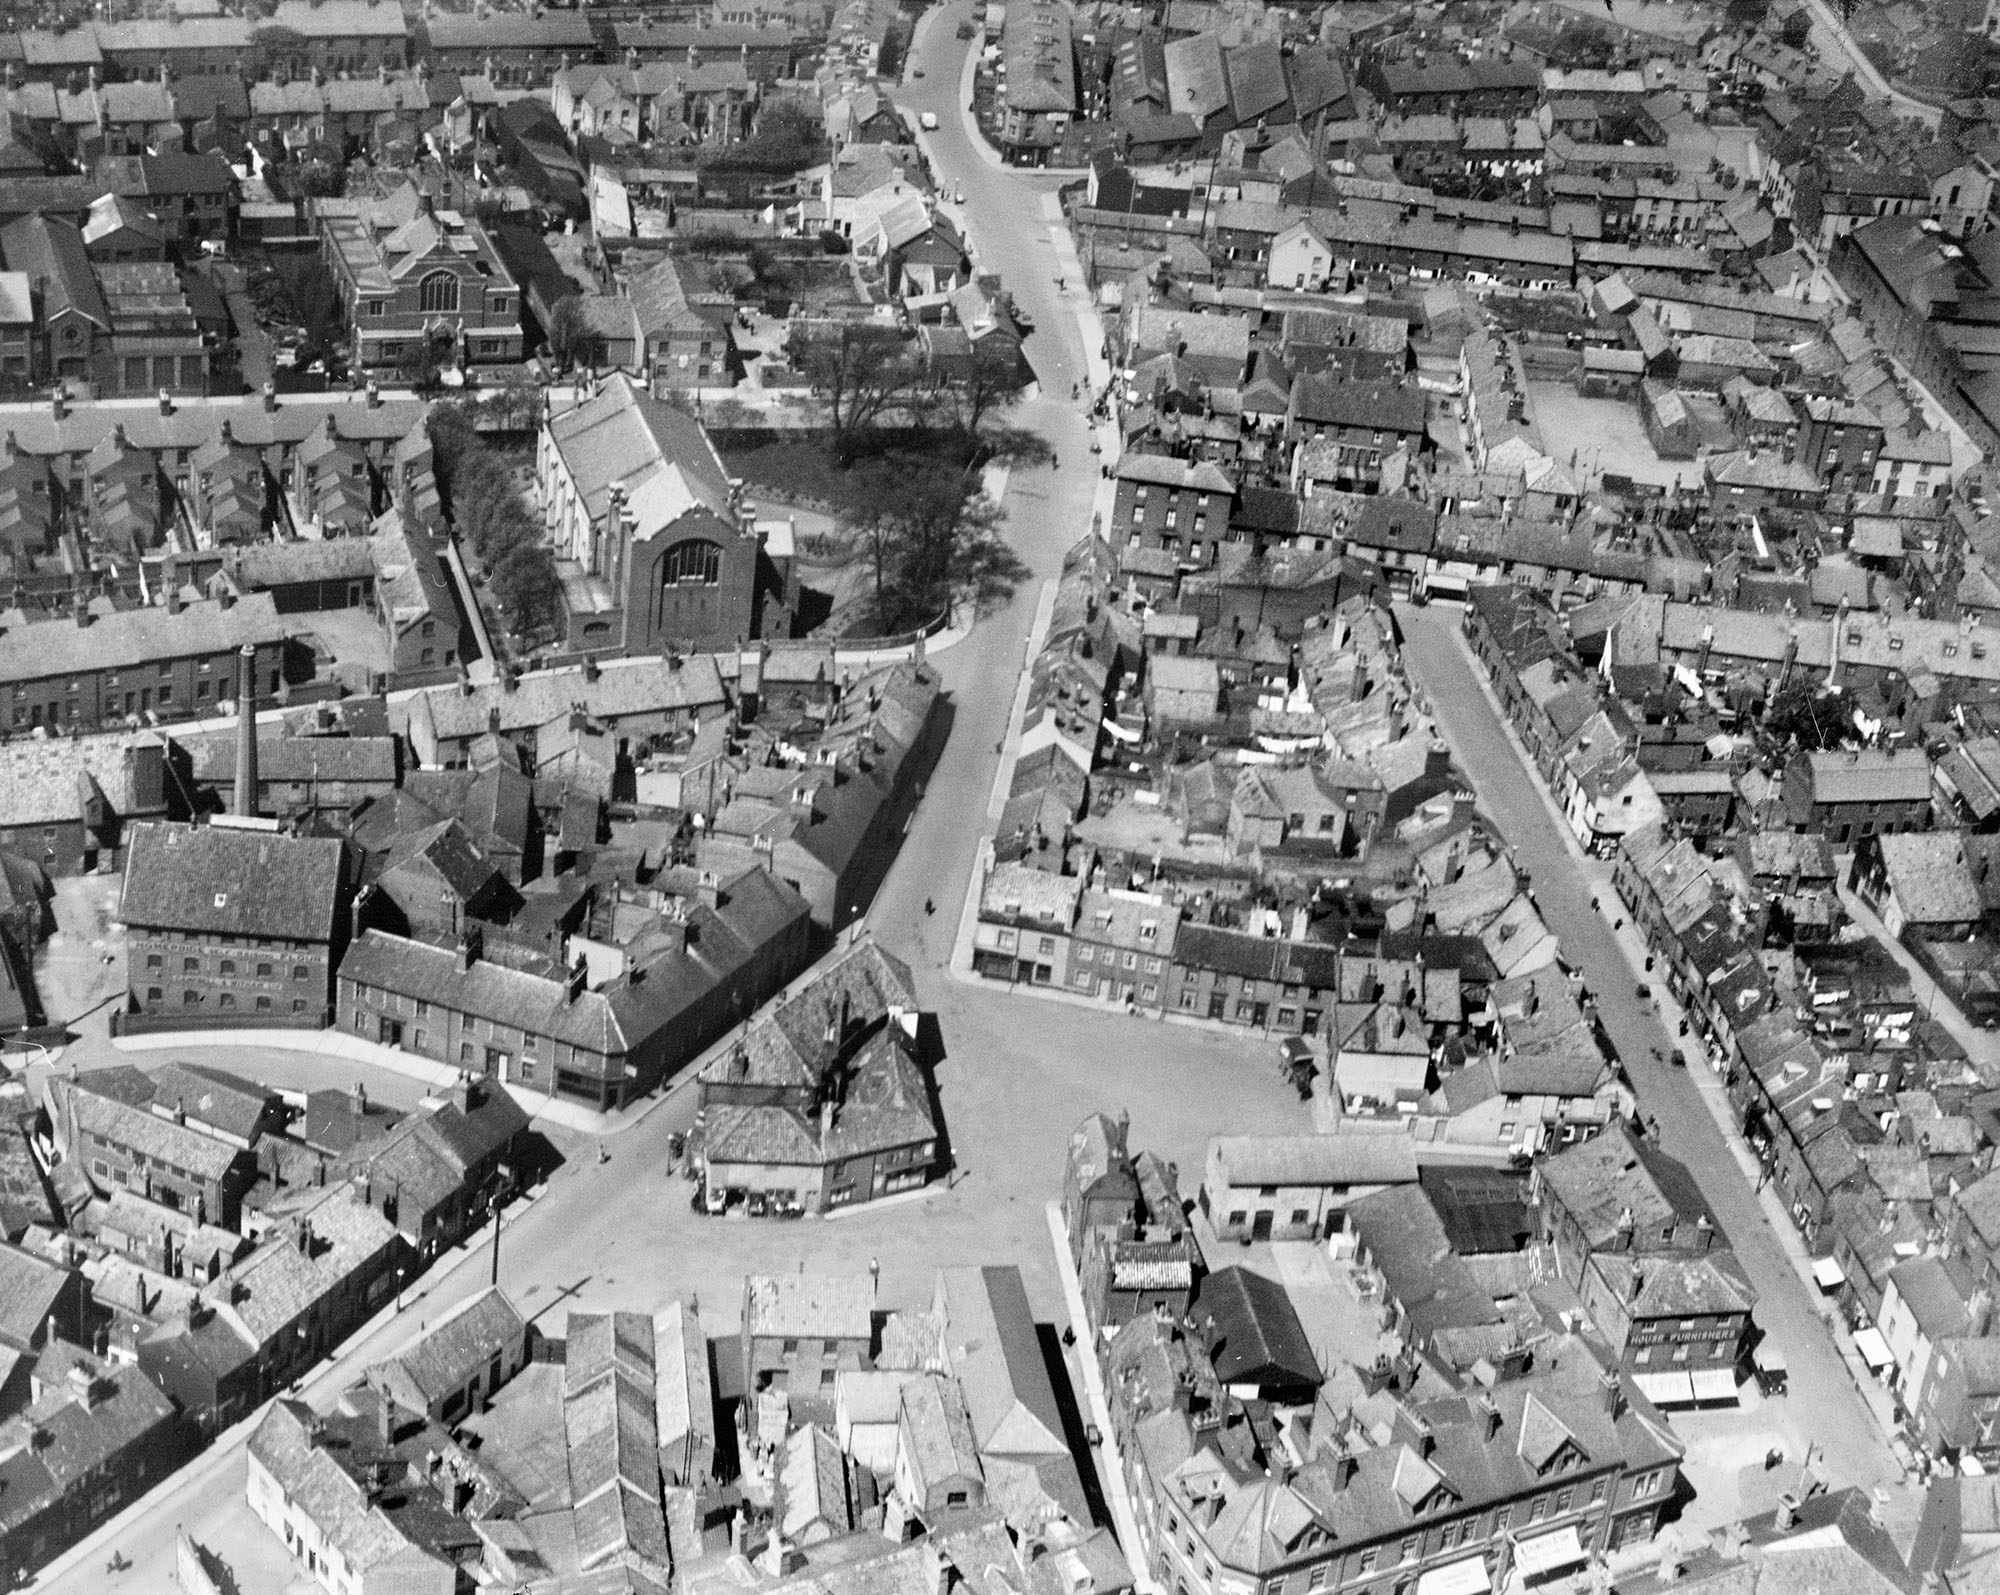 Photo shows a black and white aerial photo of residential, religious and industrial buiildings